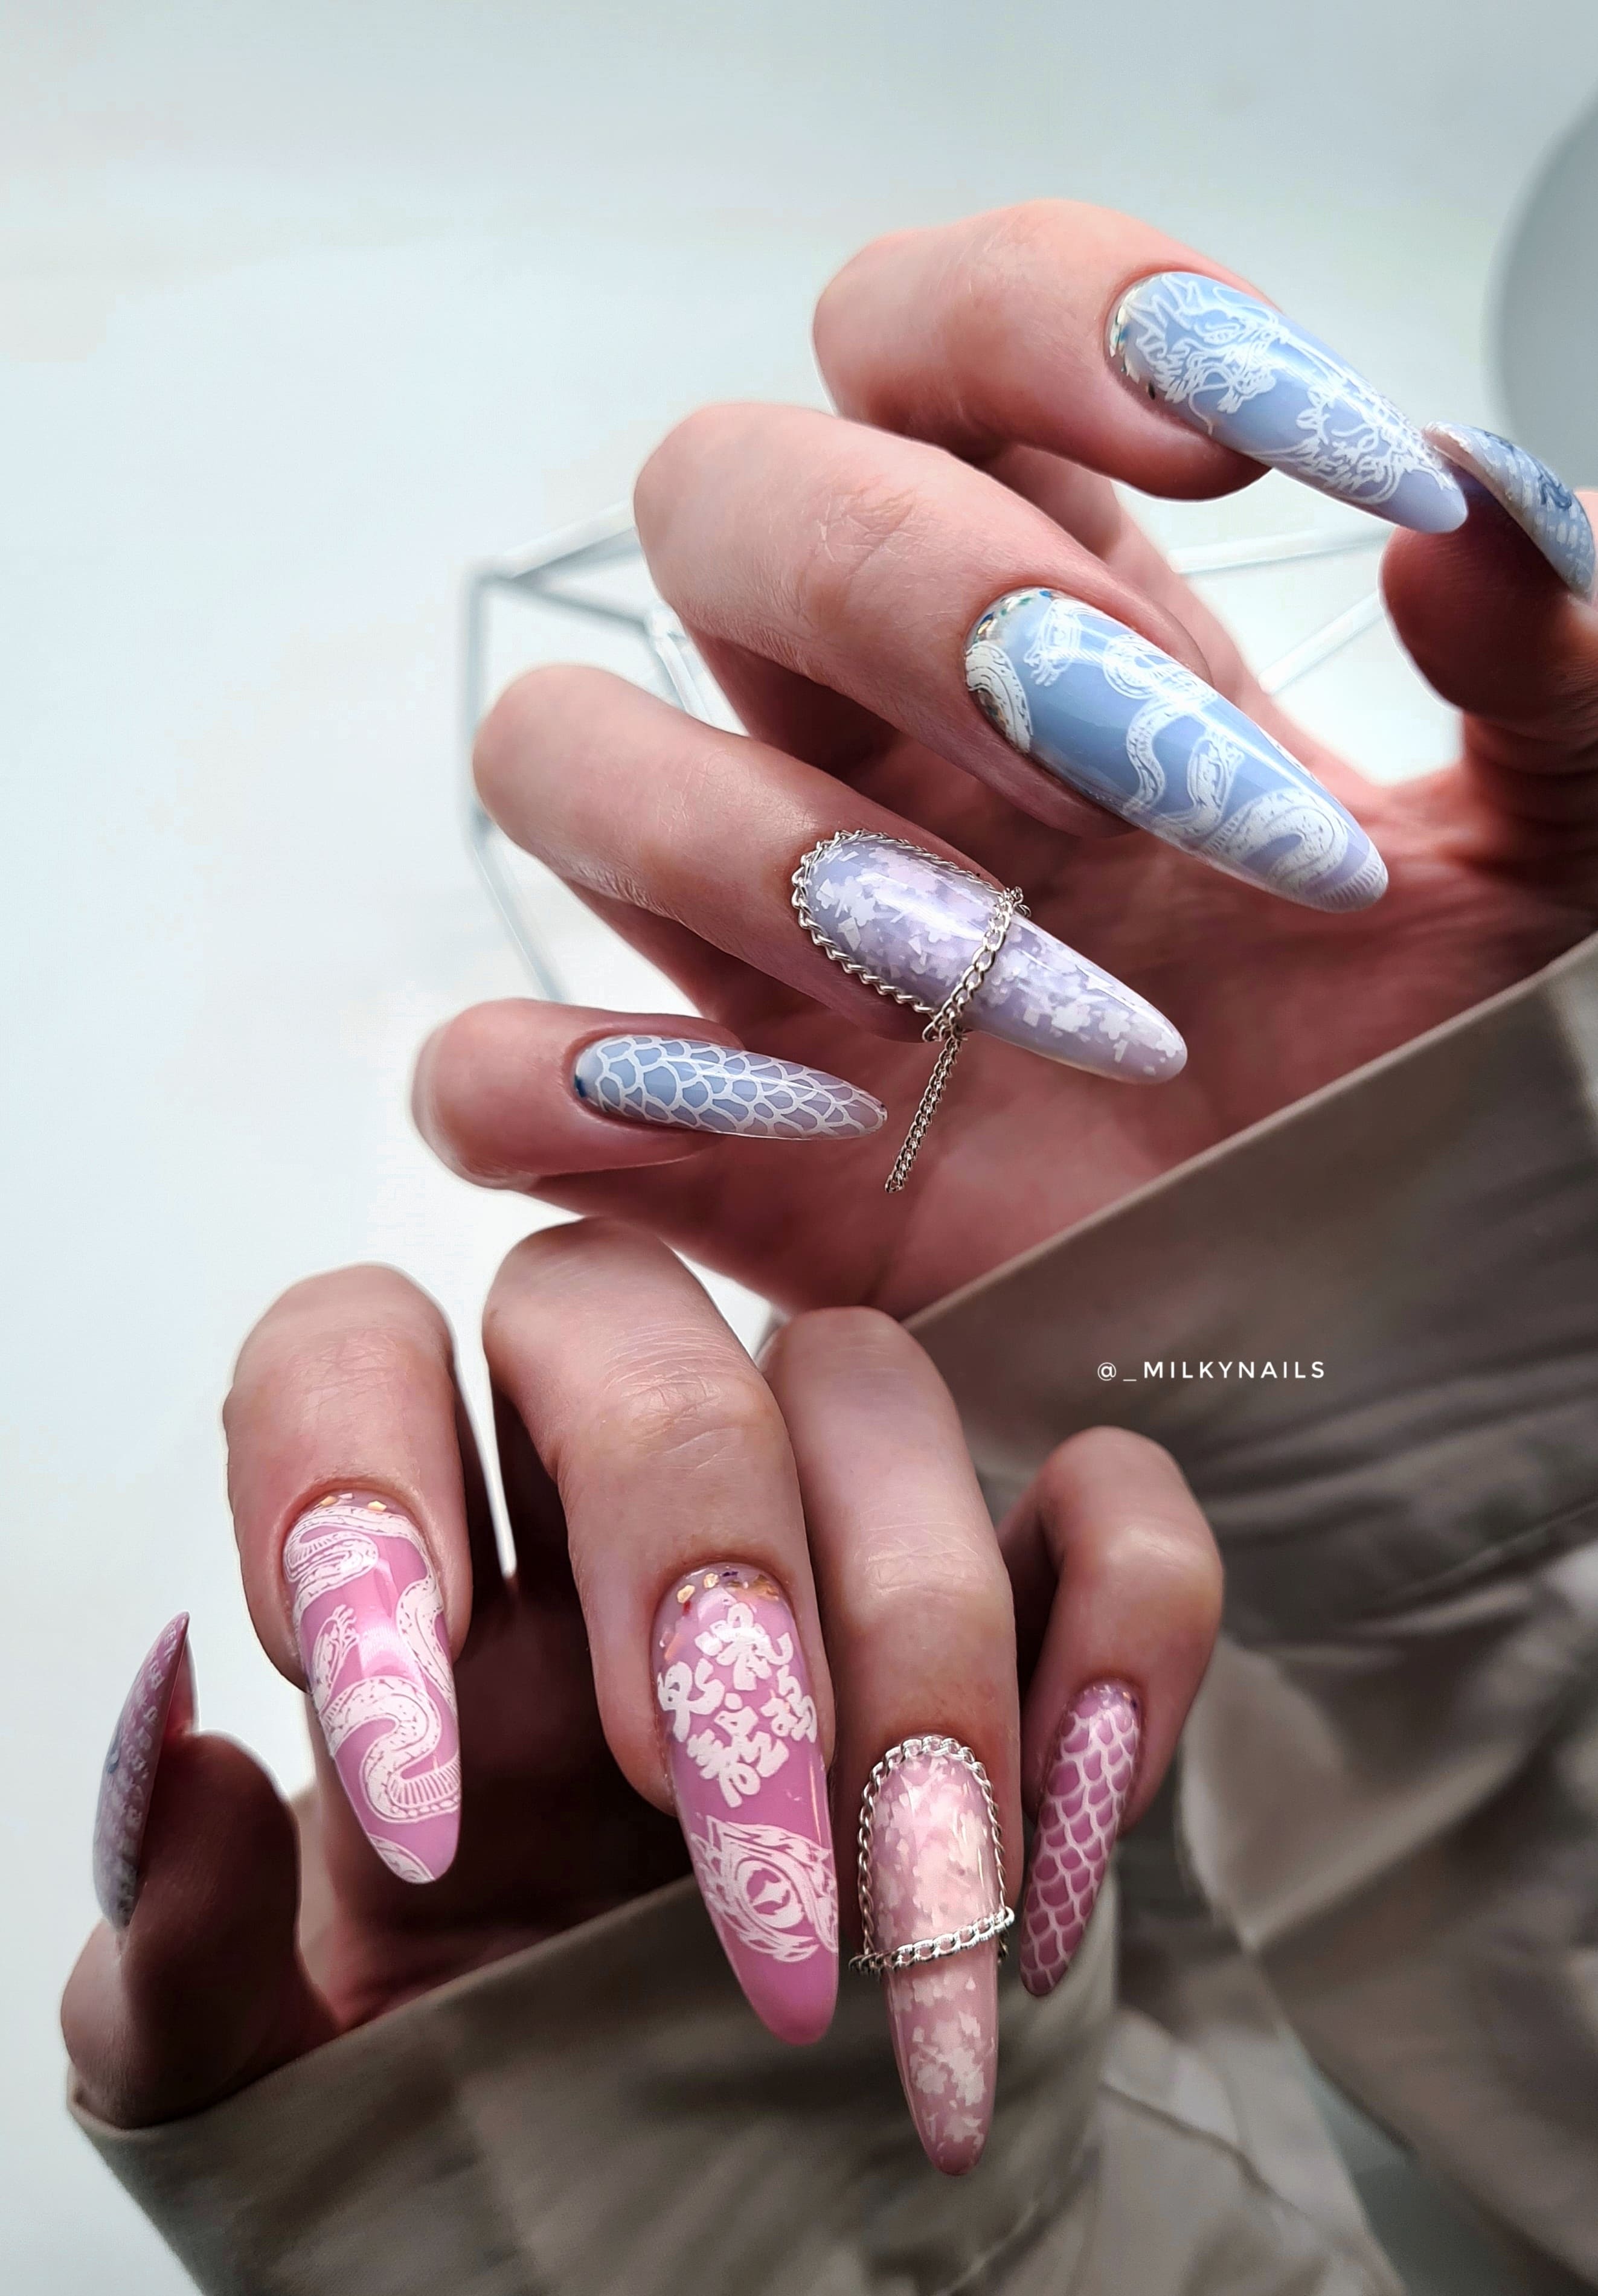 Swanky Stamping, Пластина 153